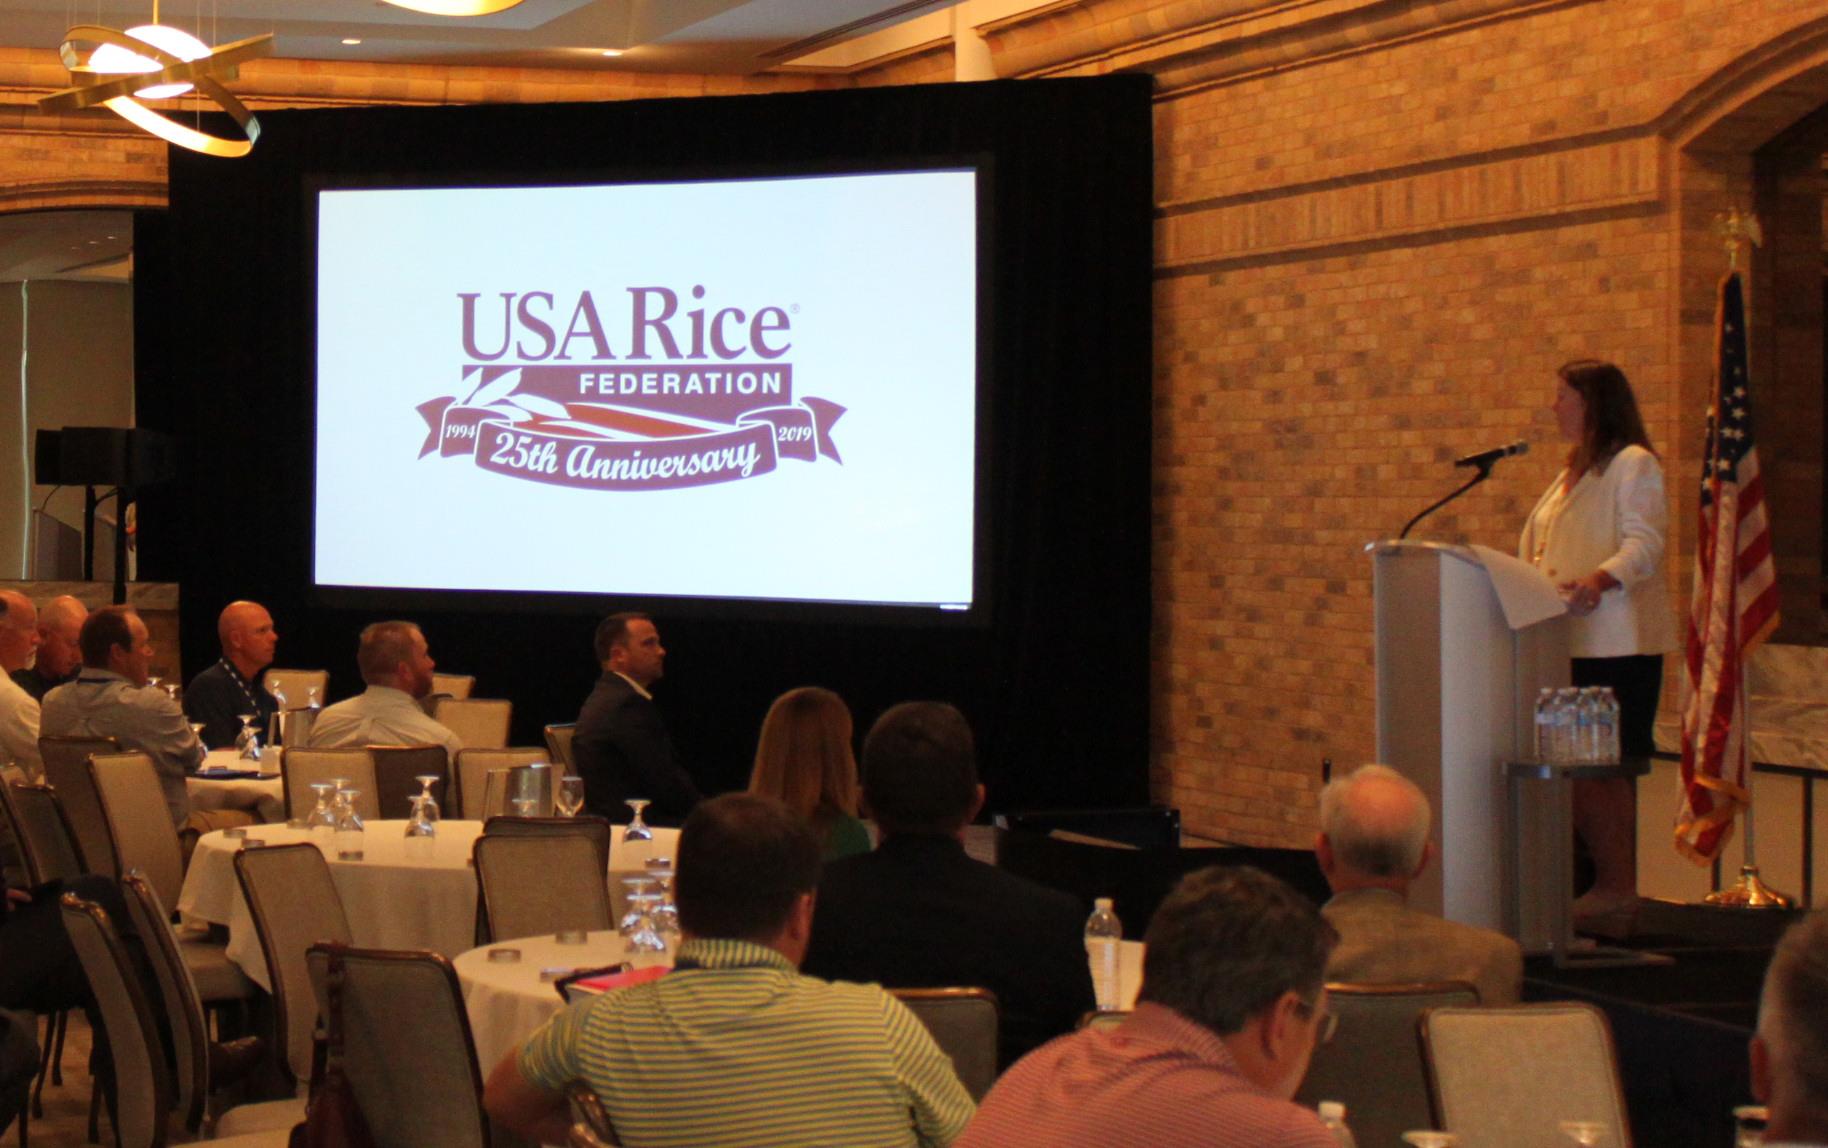 Crowded meeting room, woman standing at podium next to projected slides that reads: "USA Rice Federation 25th Anniversary"